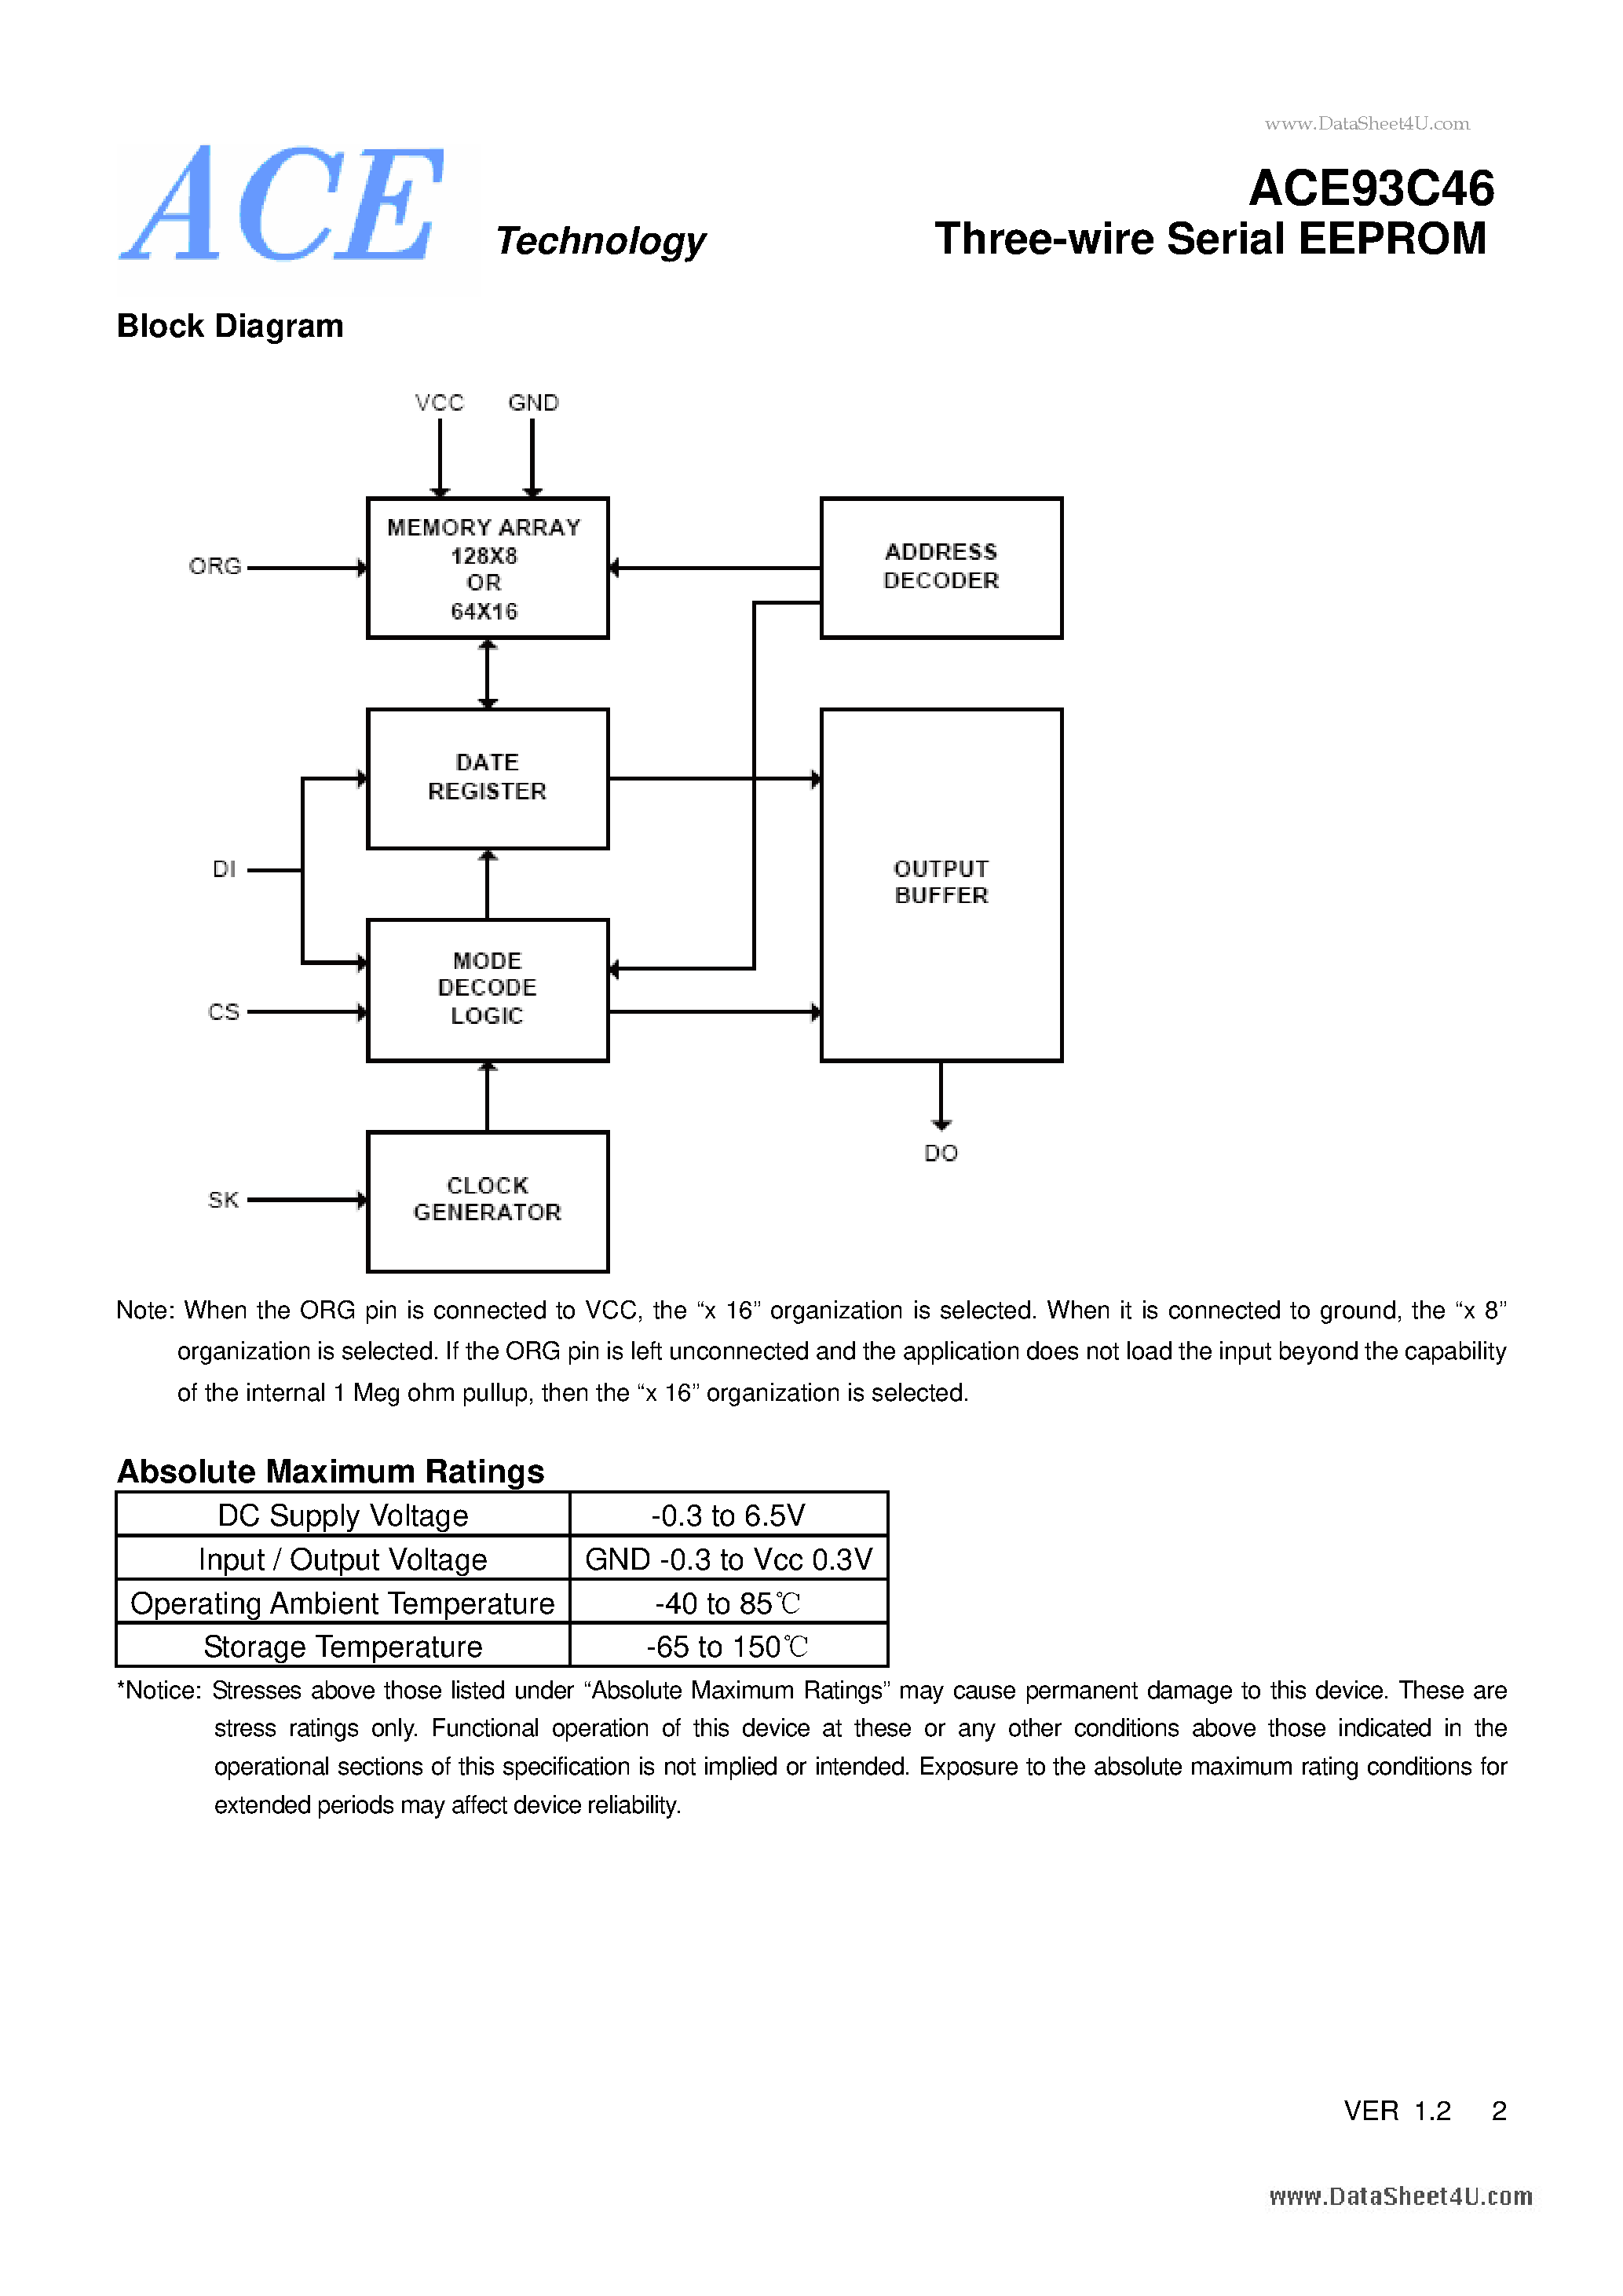 Datasheet ACE93C46 - Two-wire Serial EEPROM page 2